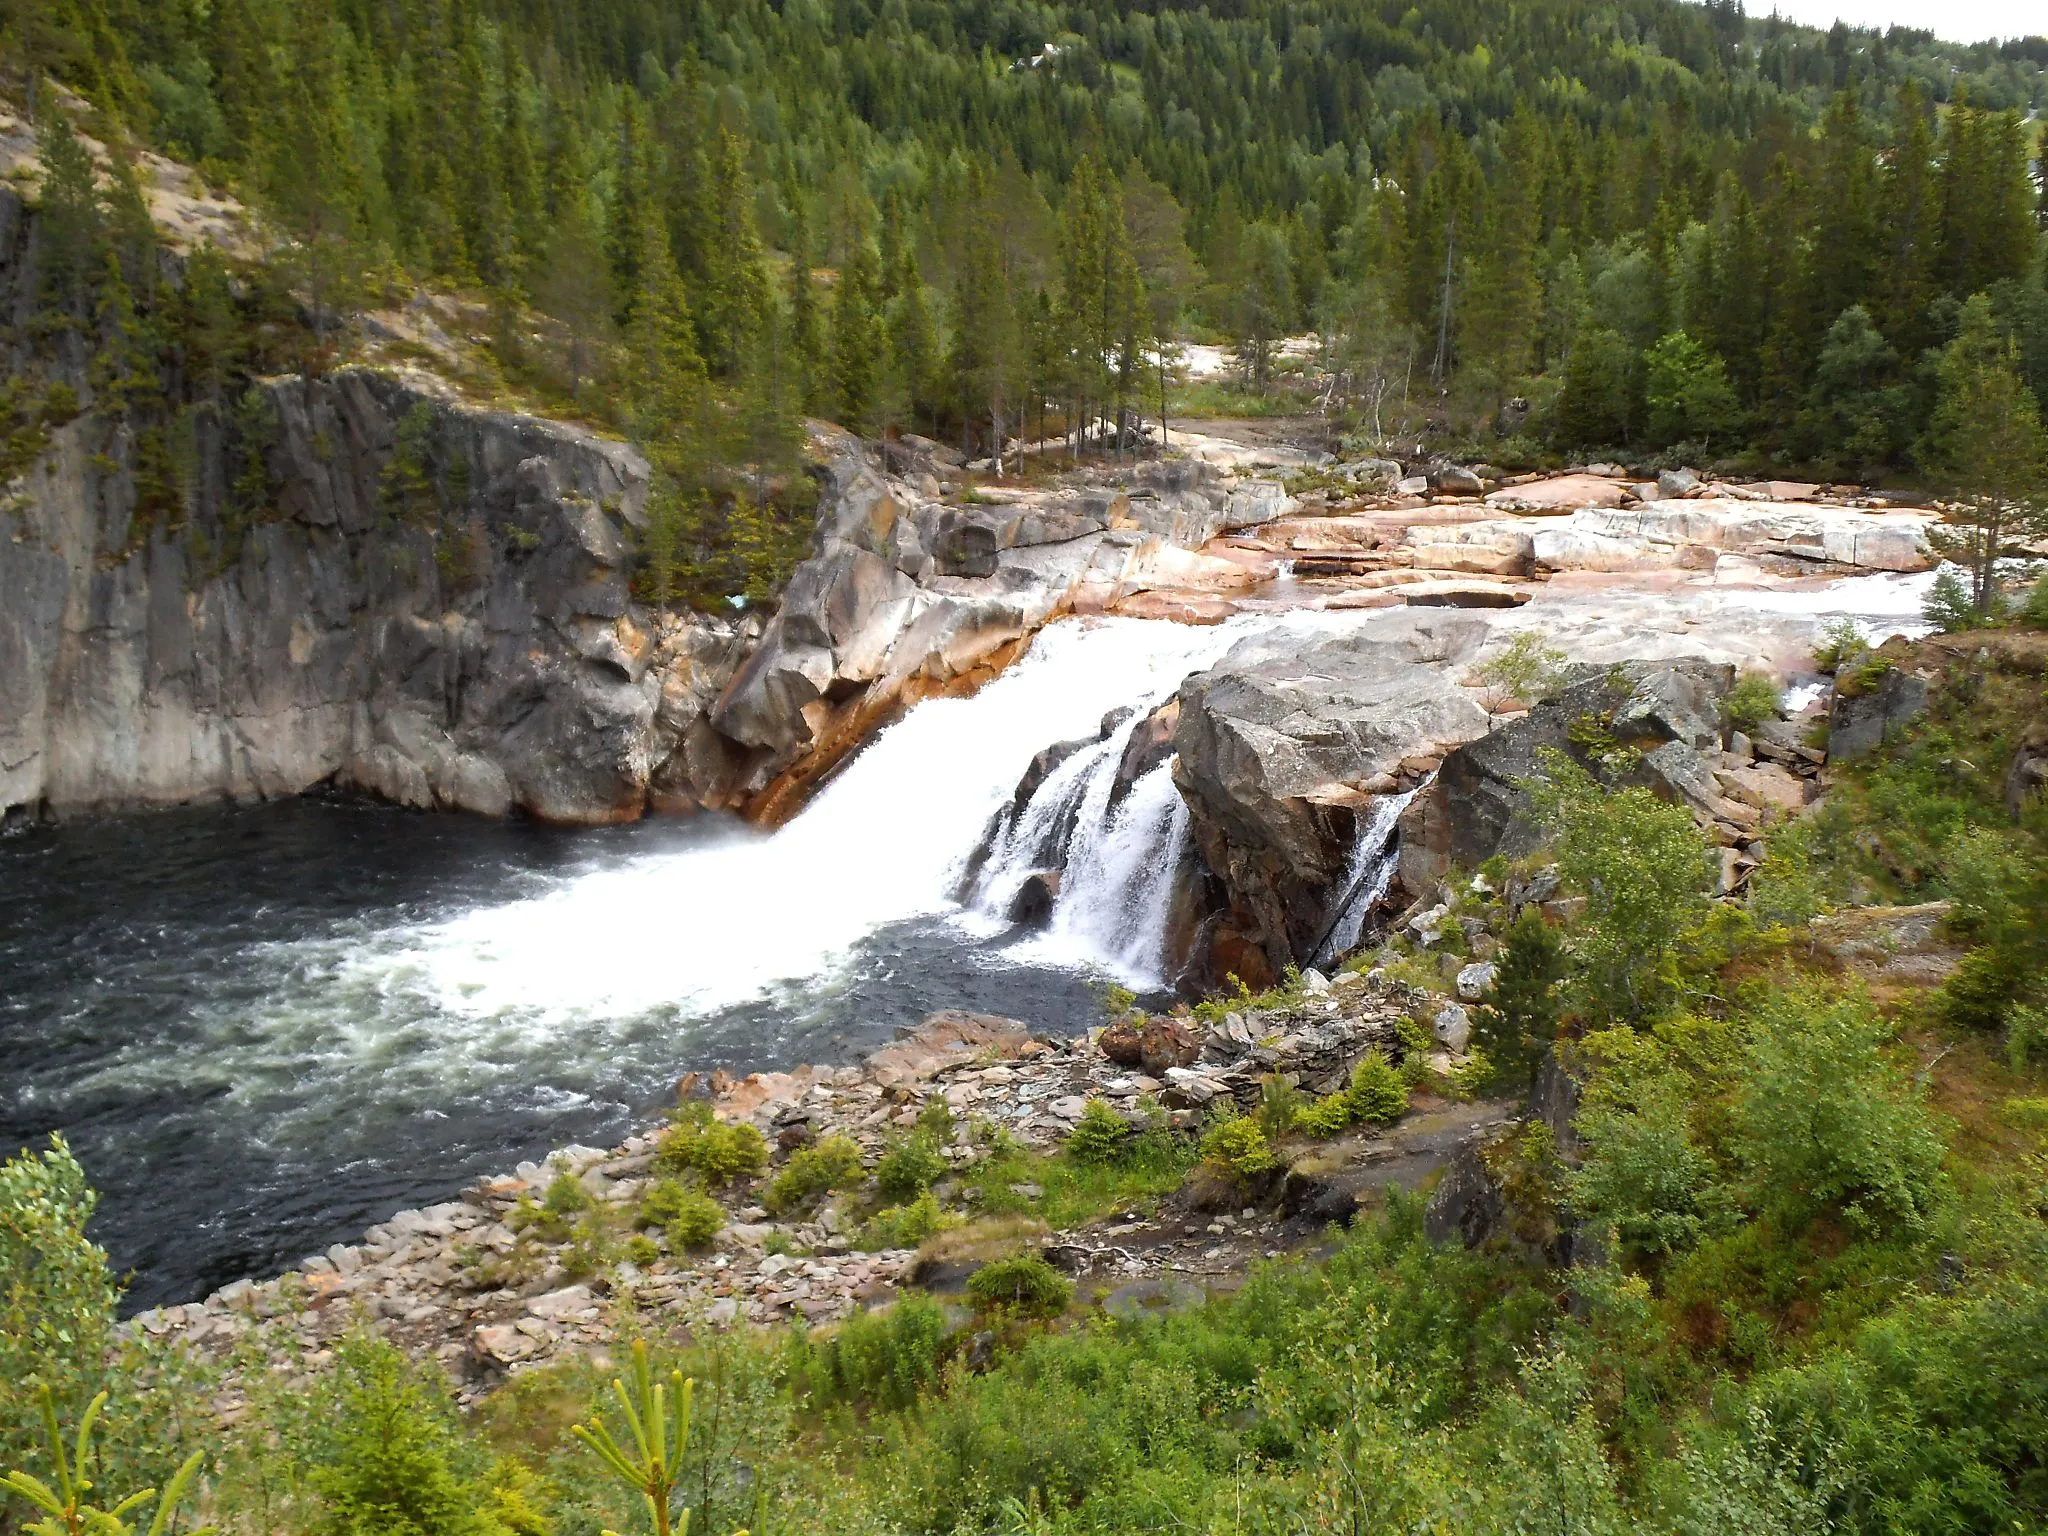 Photo showing: Eafossen is a waterfall in the river Gaula, located in Holtålen, Norway. It was earlier called Hyttfossen.